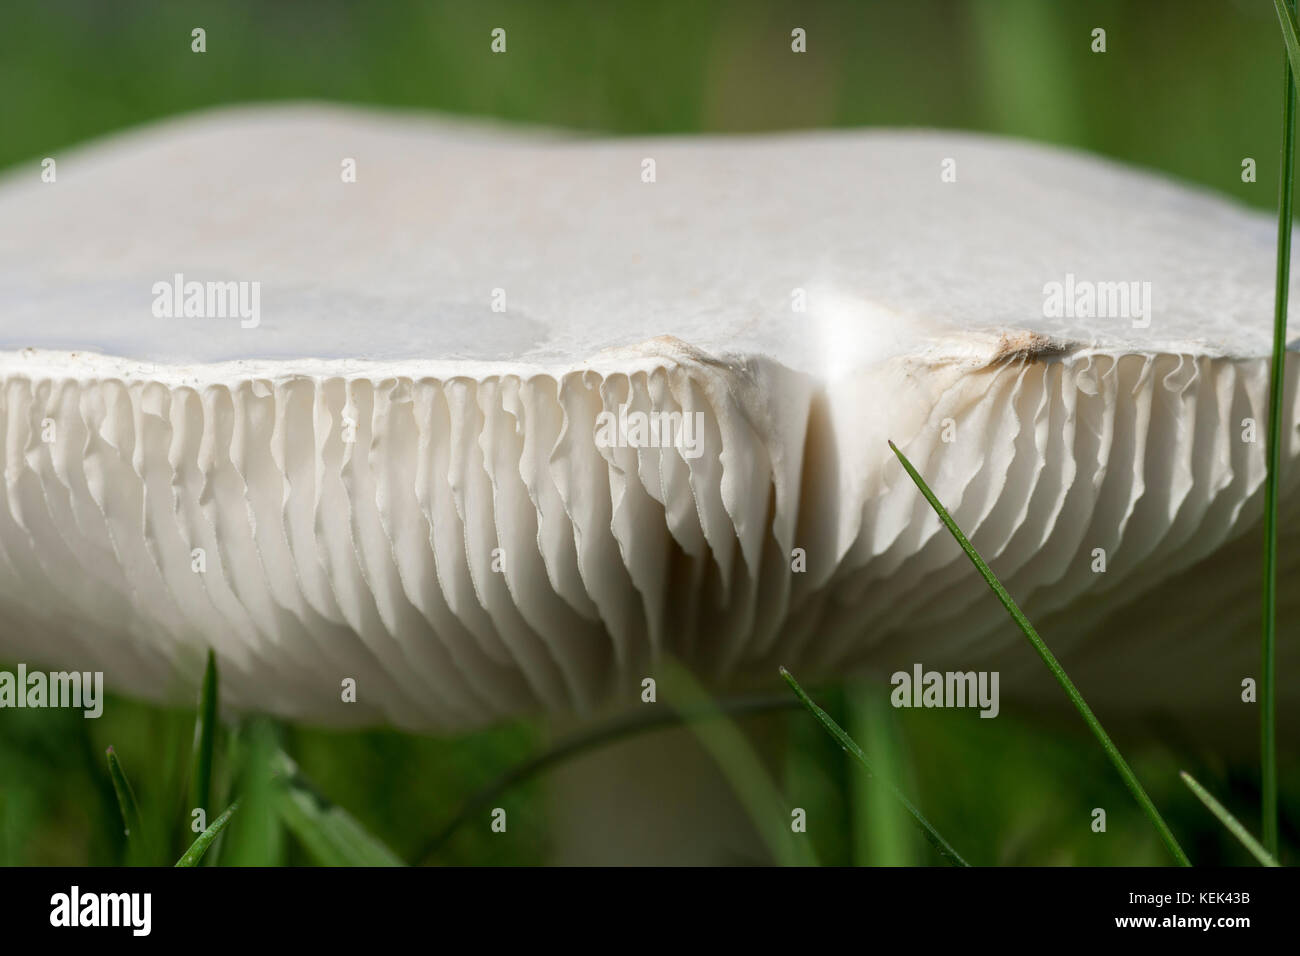 Close-up photo of a mushroom - champignon growing on a green lawn in the wild at sunshine in autumn bright day Stock Photo